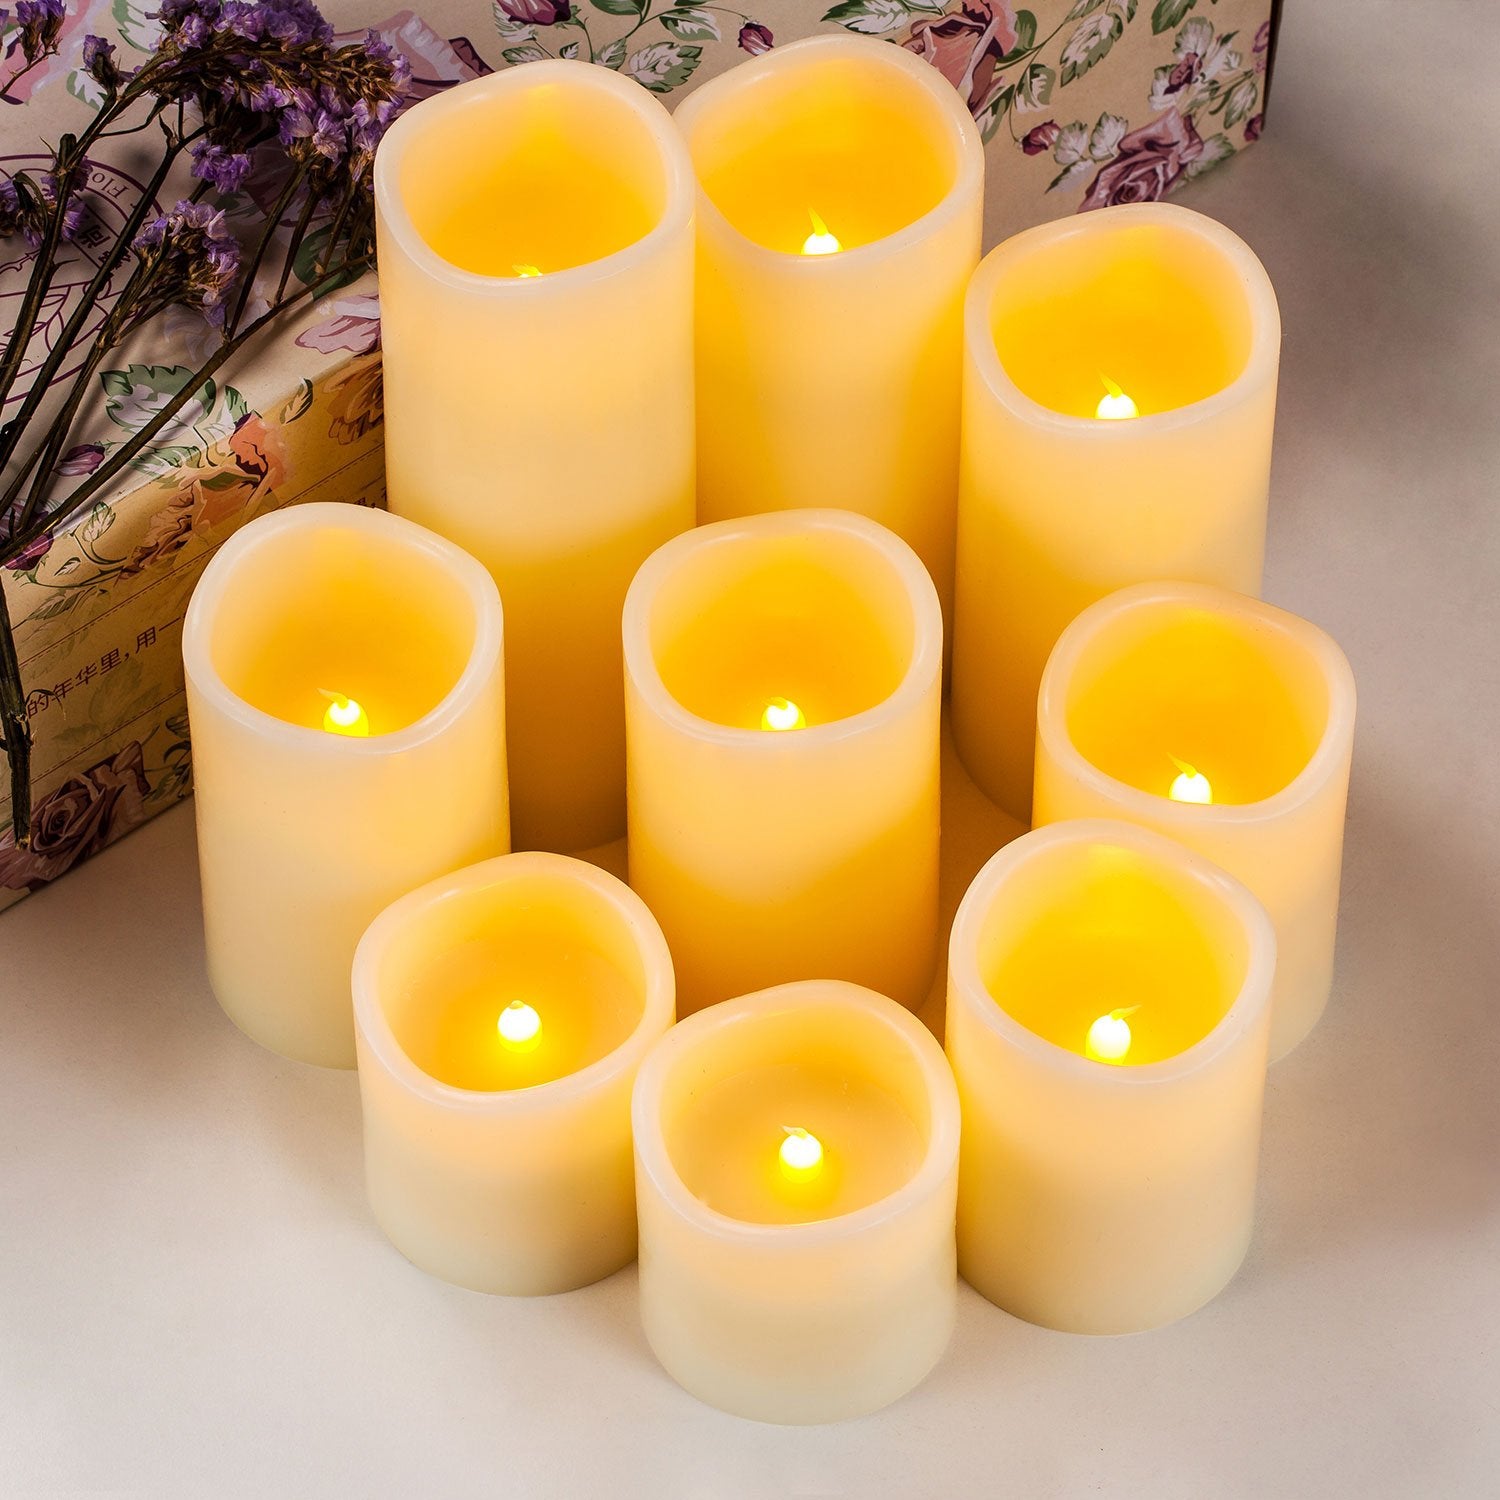 Ry-king 4 5 6 7 8 9 Pillar Flickering Flameless LED Candles with 10-key Remote Timer, Set of 9 by RY